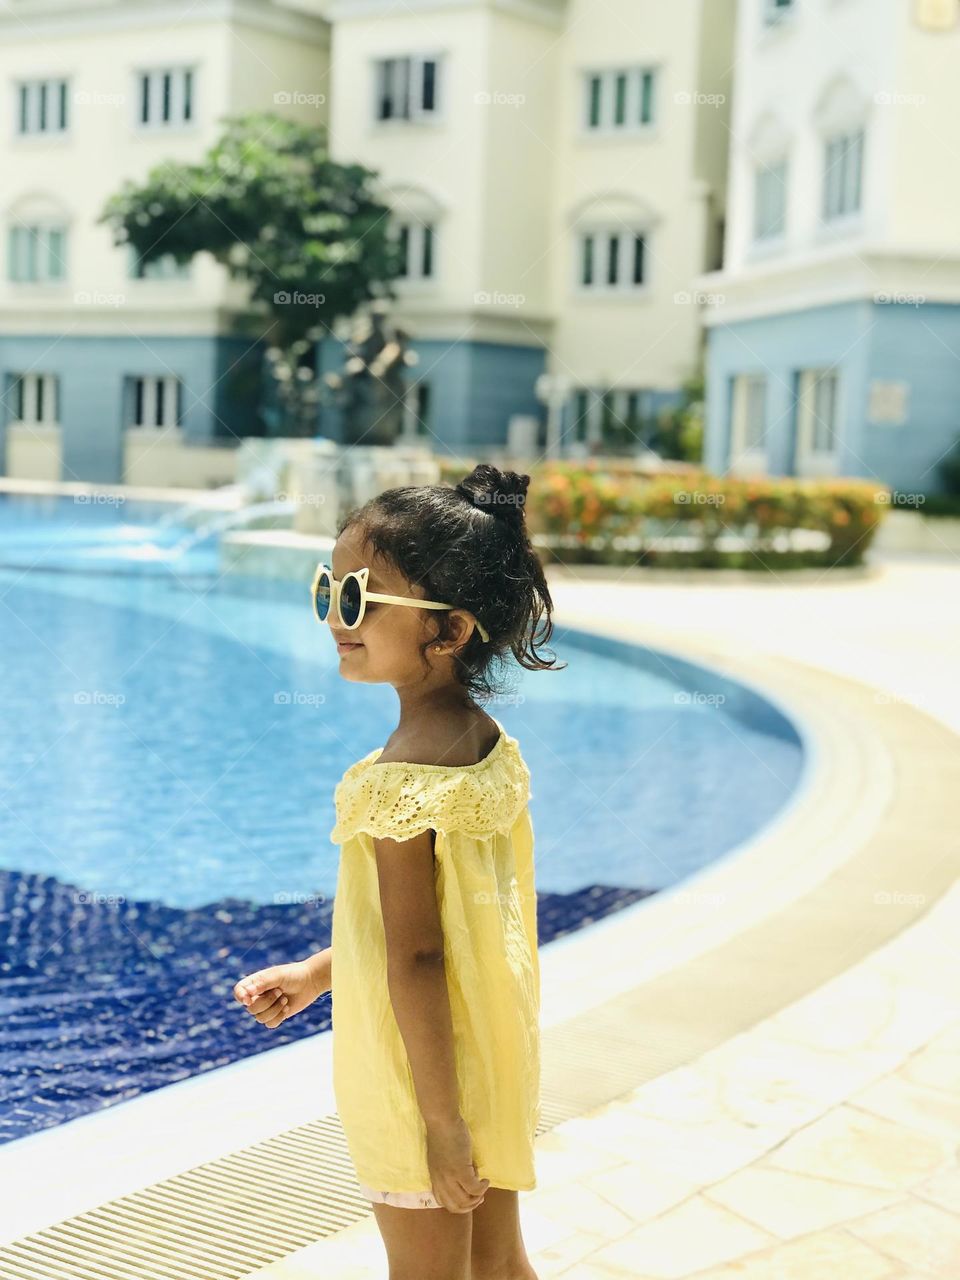 A cute girl standing near swimming pool in a summer outfits and wear sunglasses.